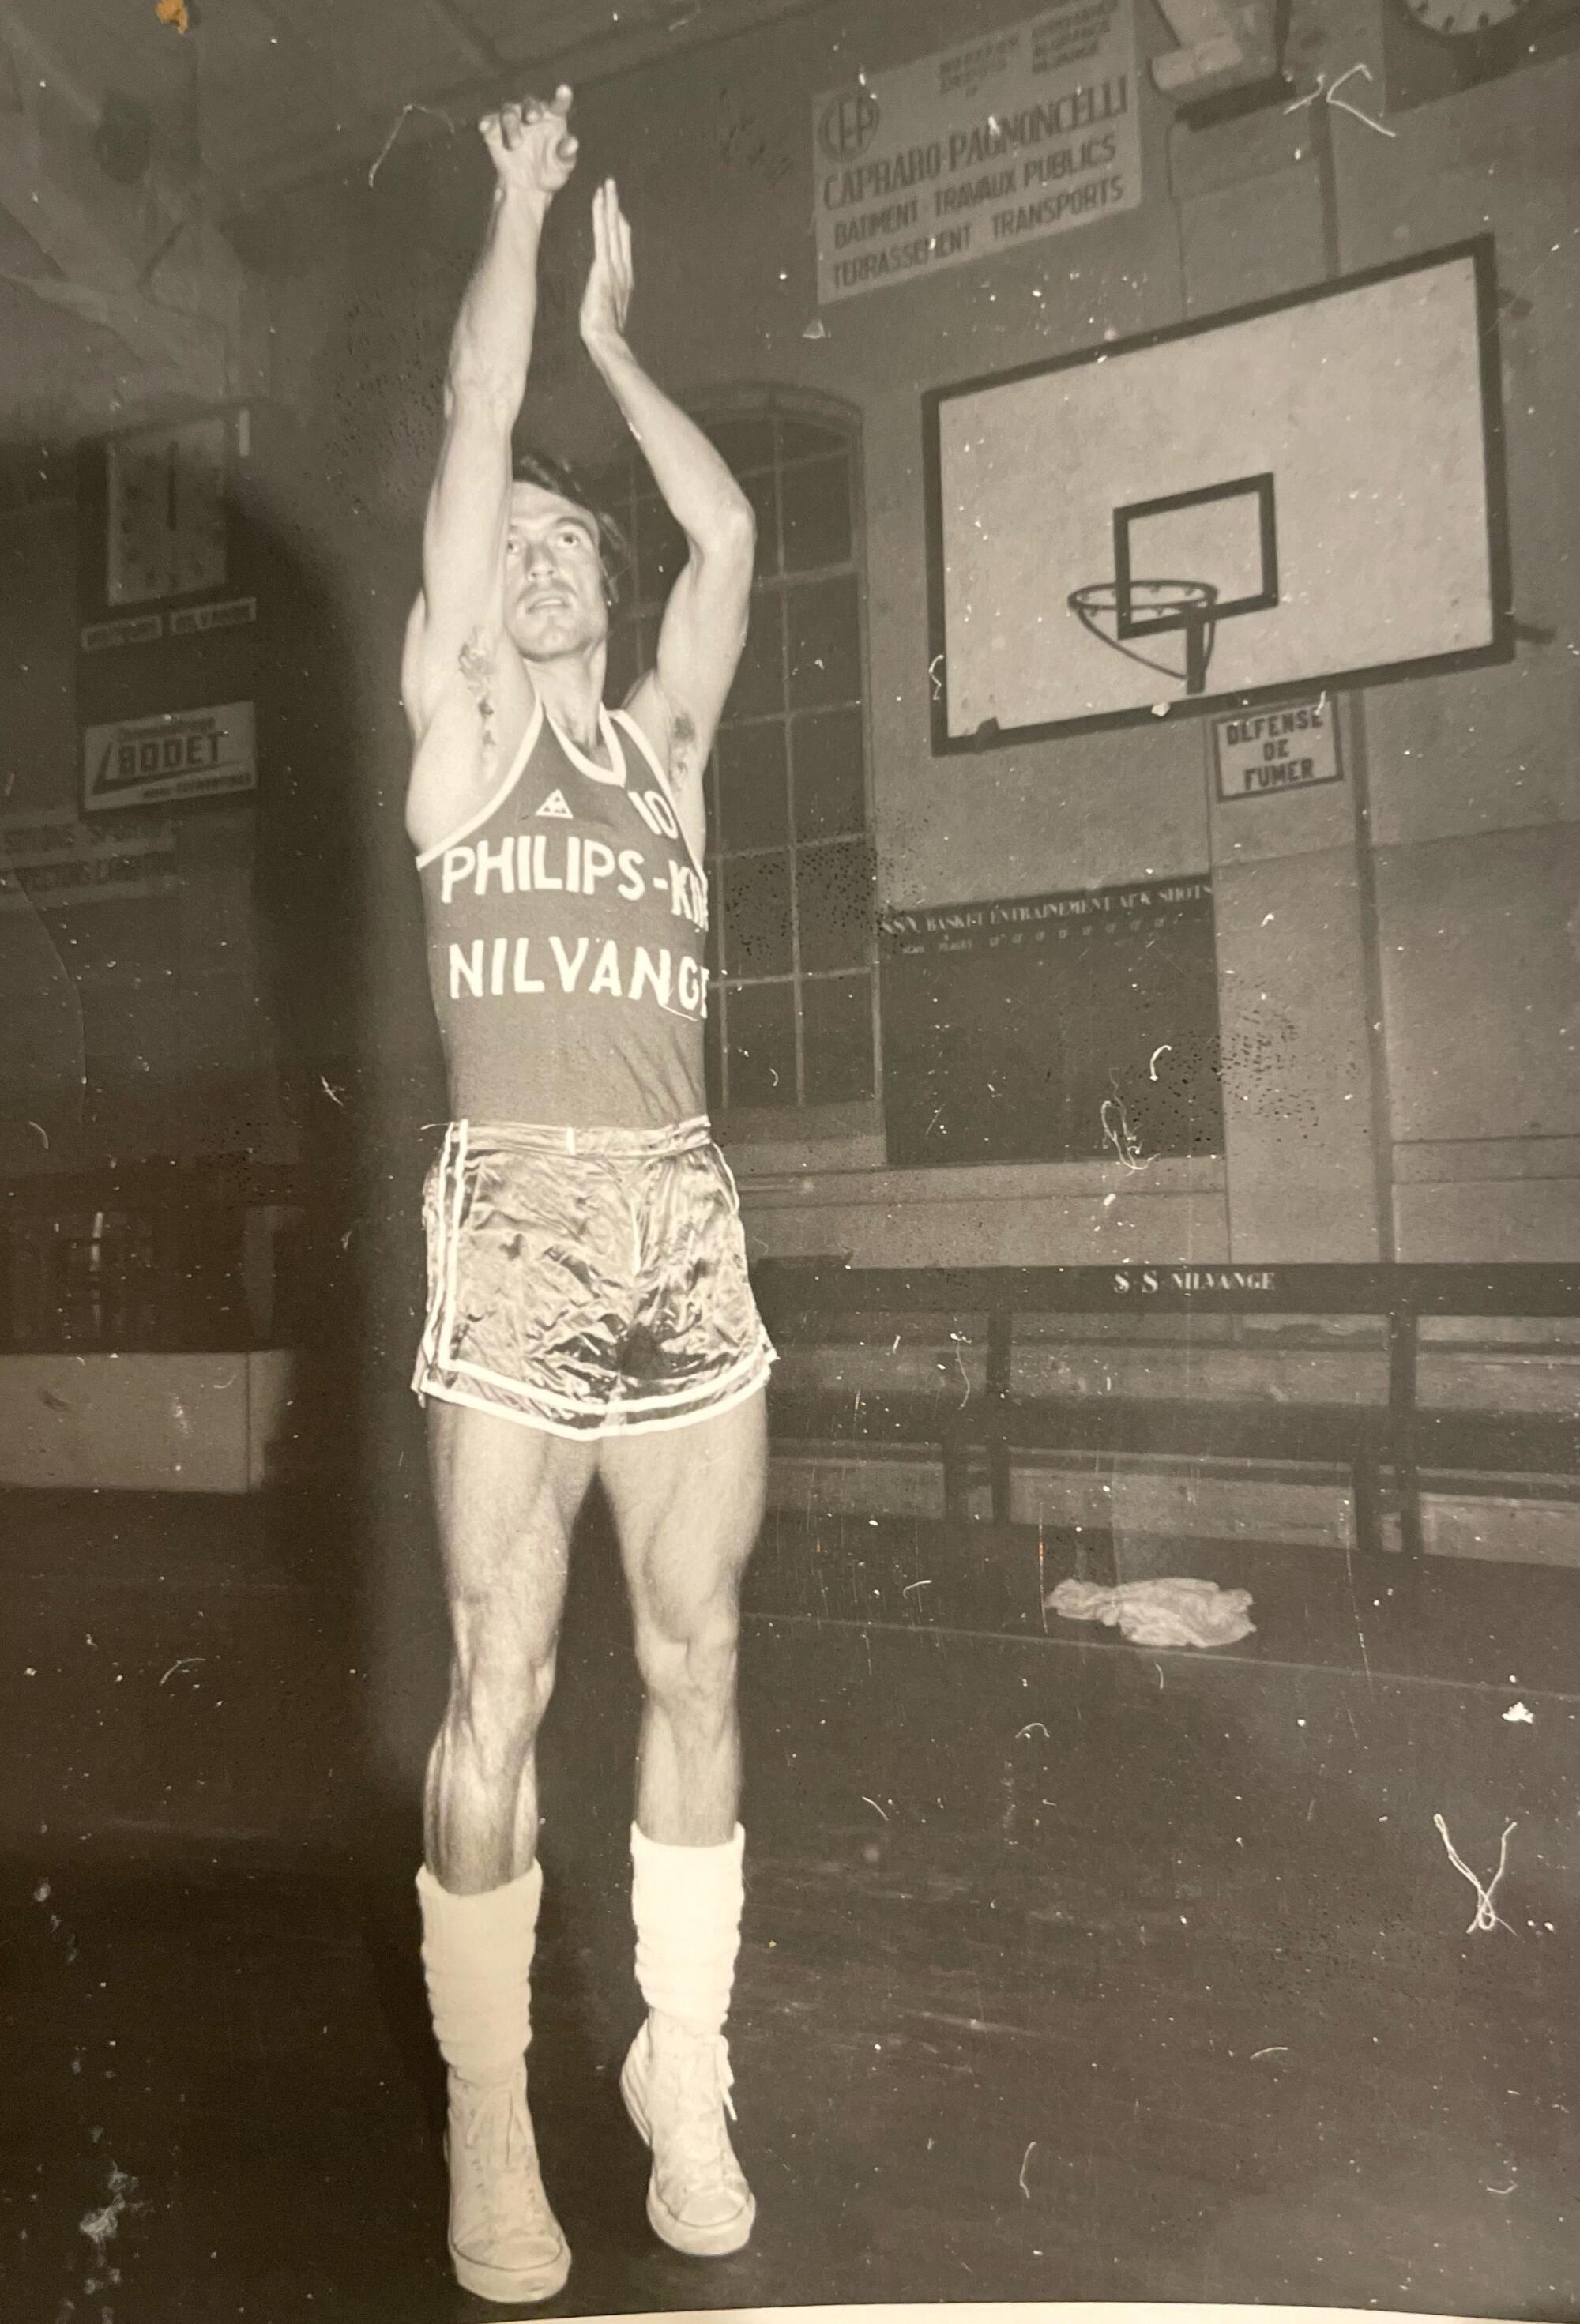 Bob Thate practices his shot while playing professional basketball in France.